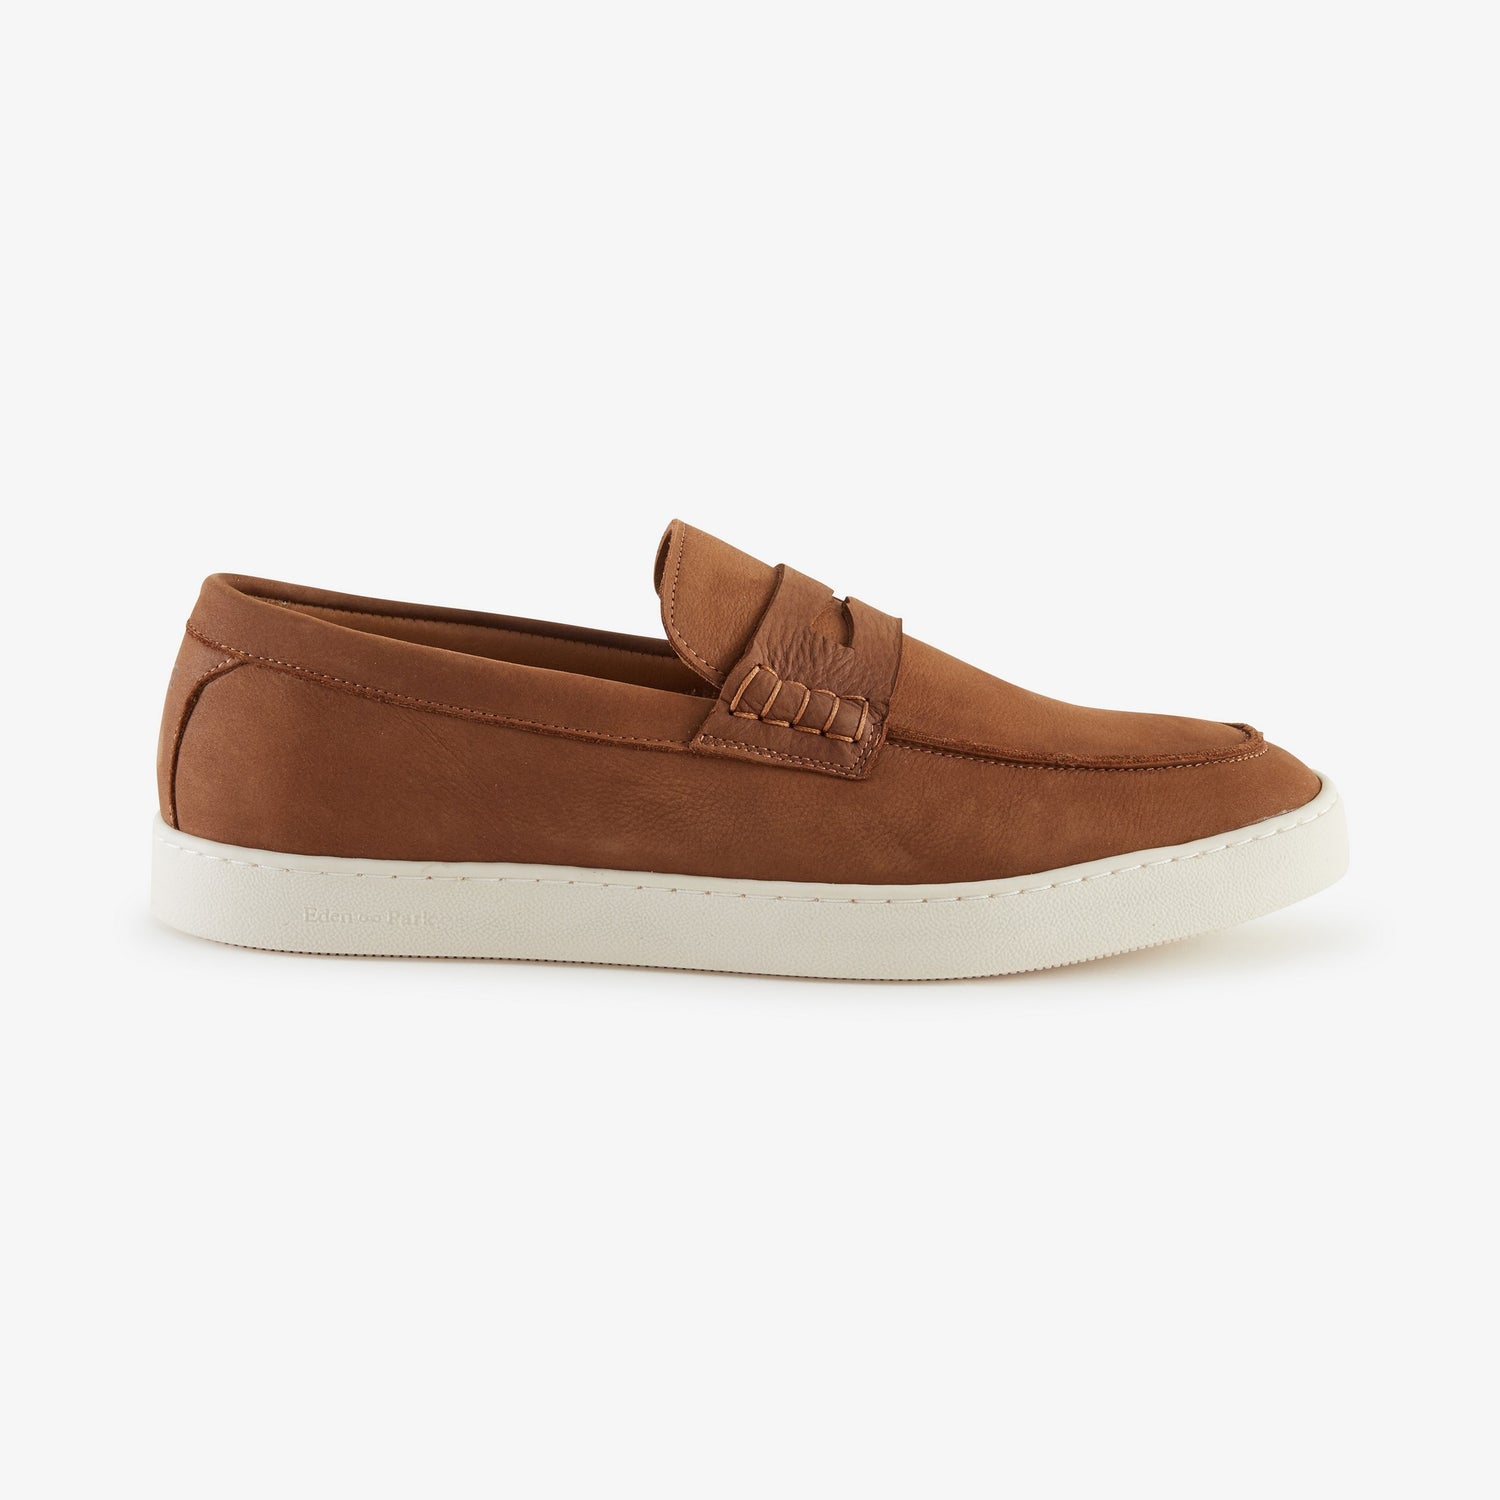 brown-moccasins-in-grained-leather_e23chsmo0004_mam3_04